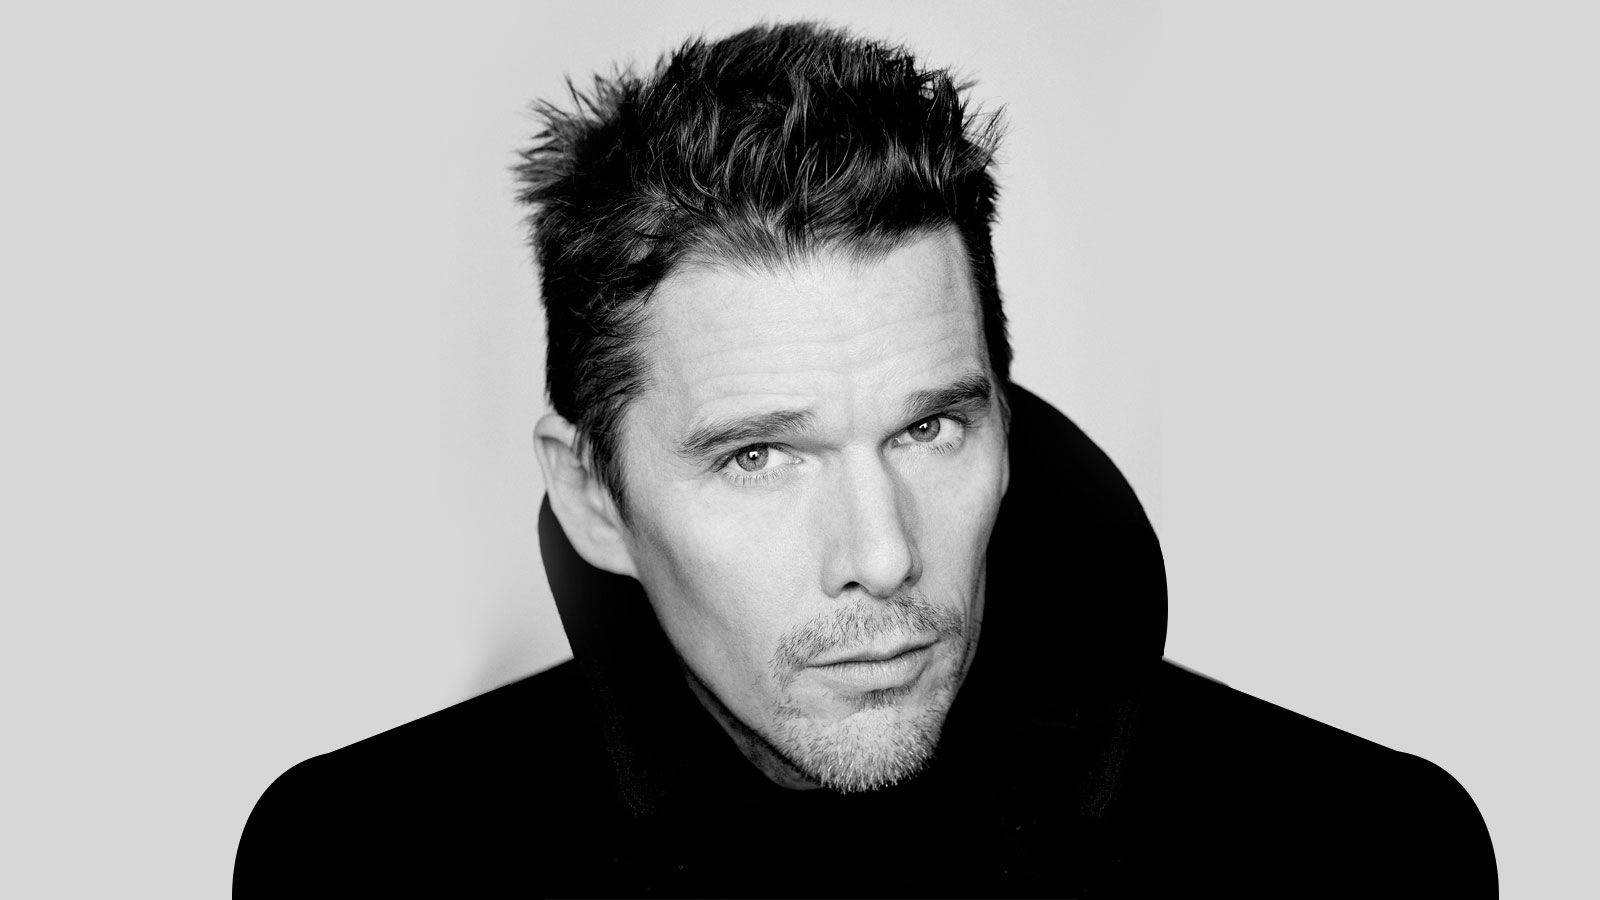 Ethan Hawke Model And Actor Wallpaper